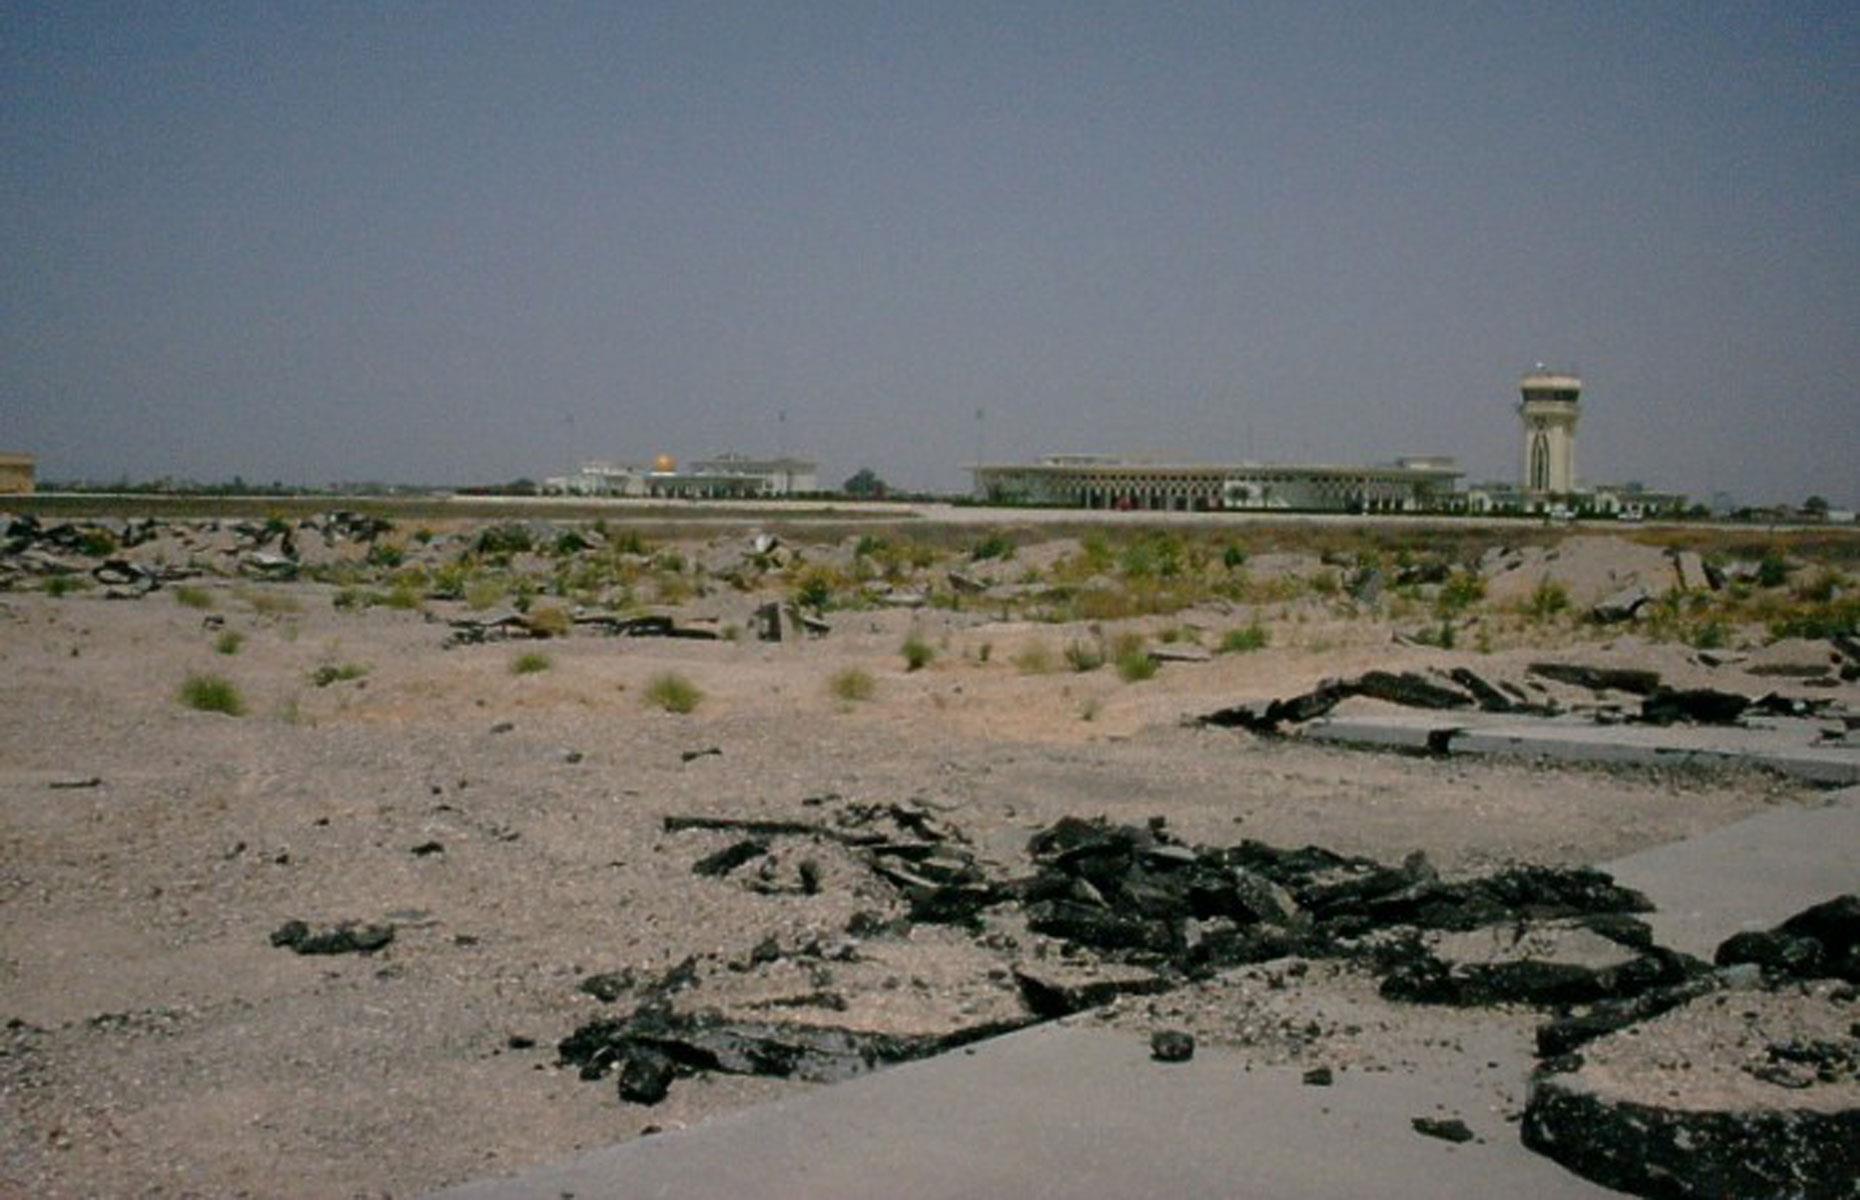 Slide 67 of 70: This major international airport near the city of Rafah in the Gaza Strip was completed with funding from the international community and opened by the then-US President Bill Clinton in 1998.